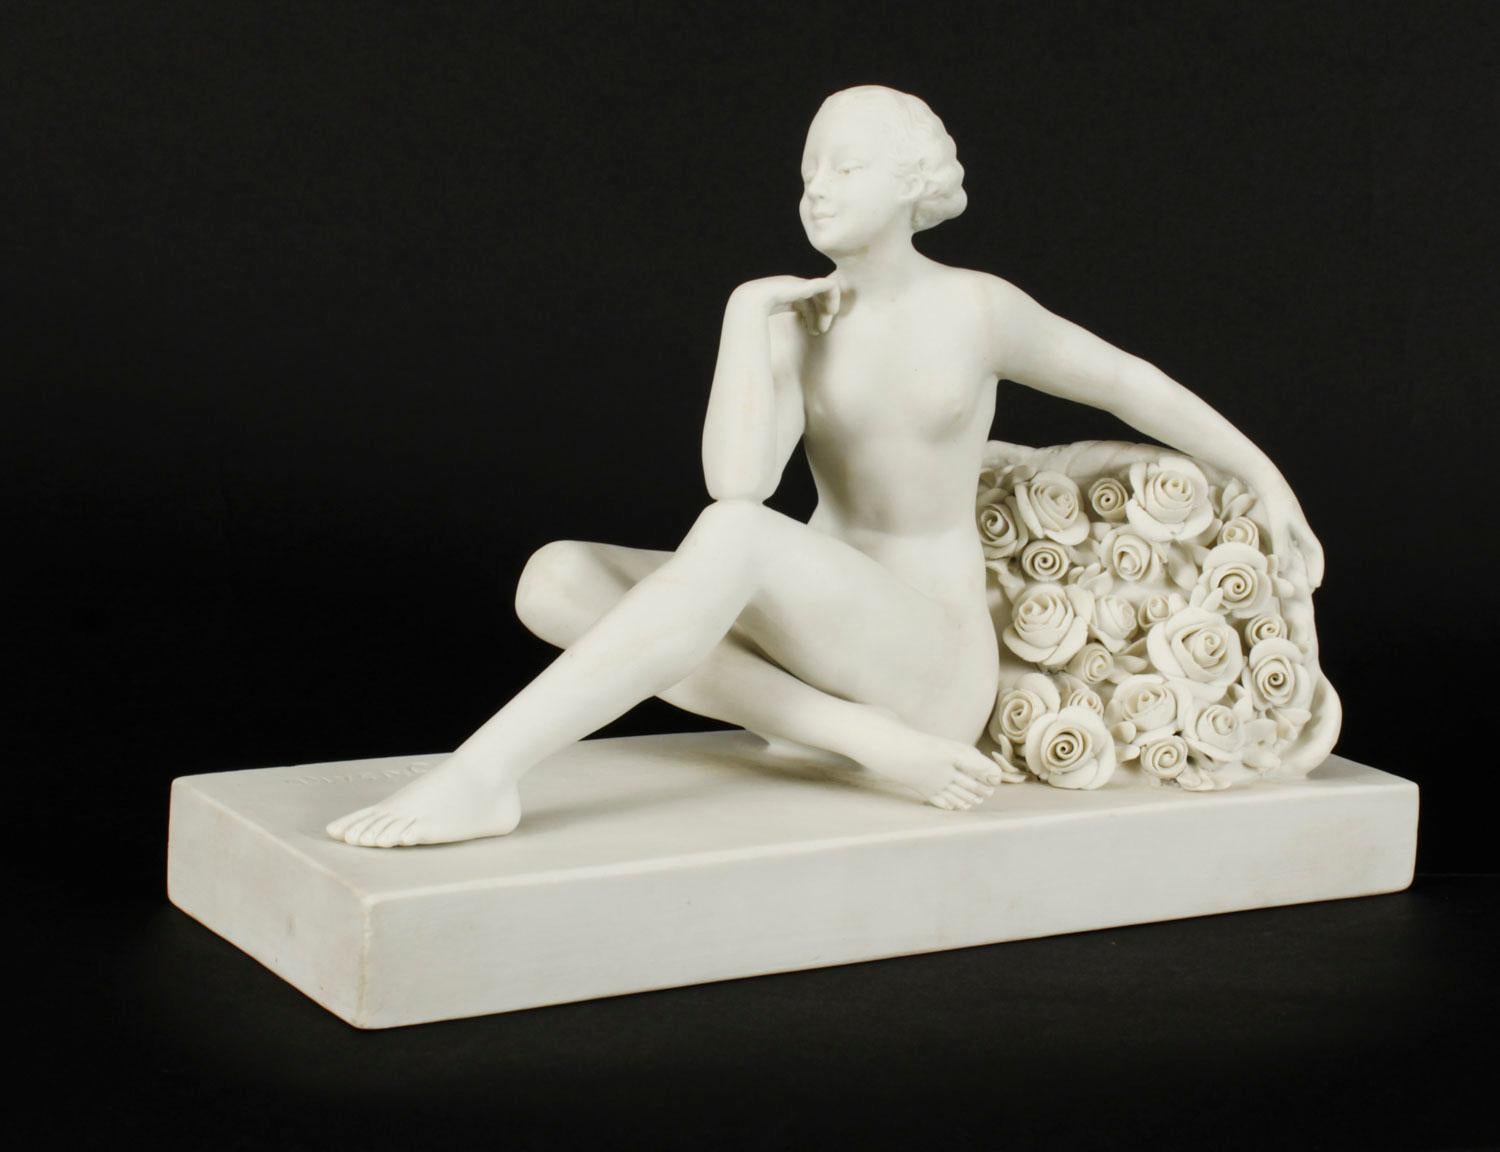 This is a magnificent antique French Art Deco bisque porcelain model of a seated nude woman with flowers by the sculptor Henri Desire Grisard (1872-active until 1940) and bearing his signature and the impressed mark 